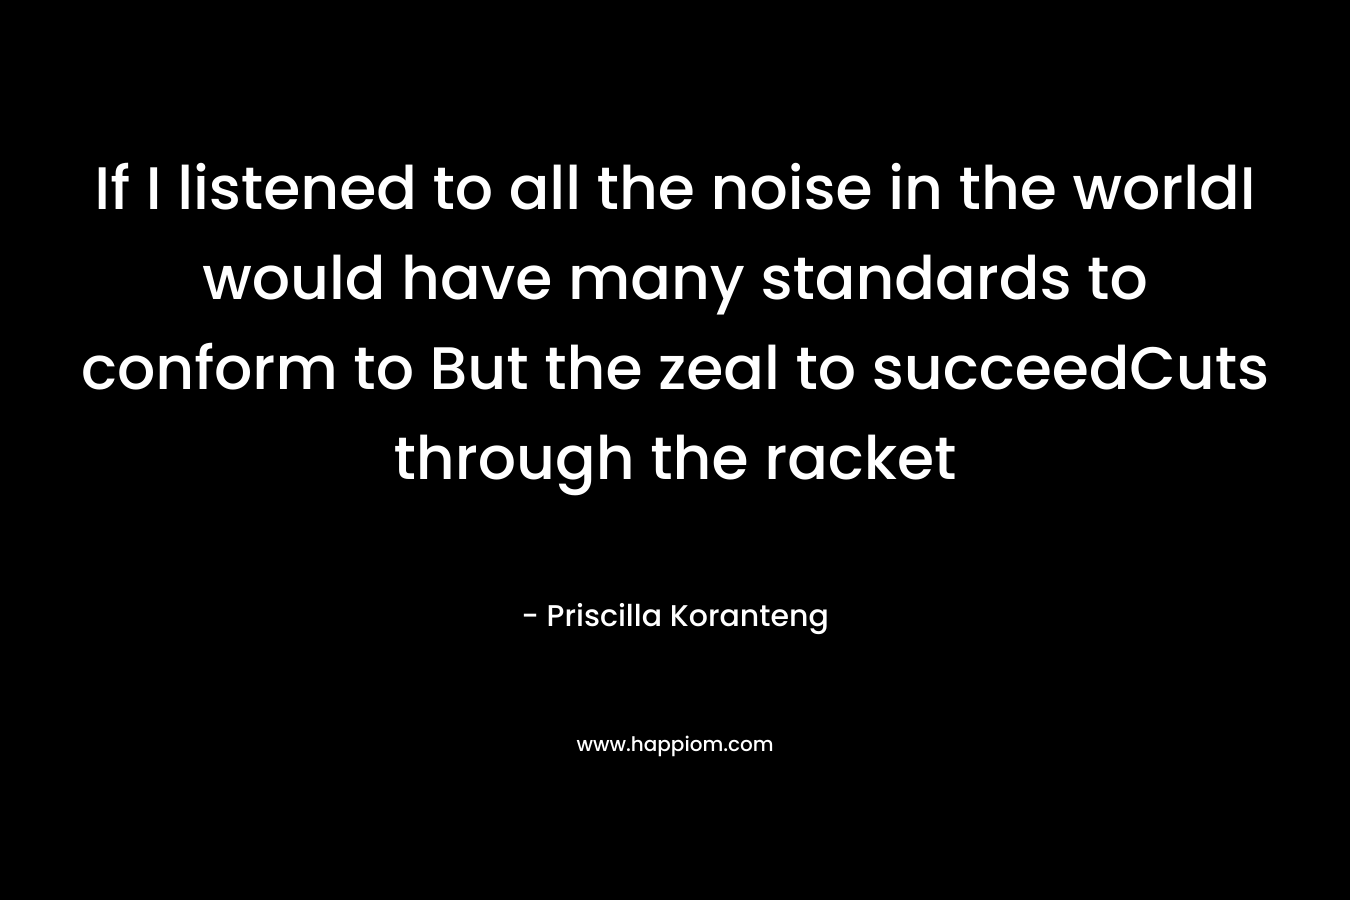 If I listened to all the noise in the worldI would have many standards to conform to But the zeal to succeedCuts through the racket – Priscilla Koranteng